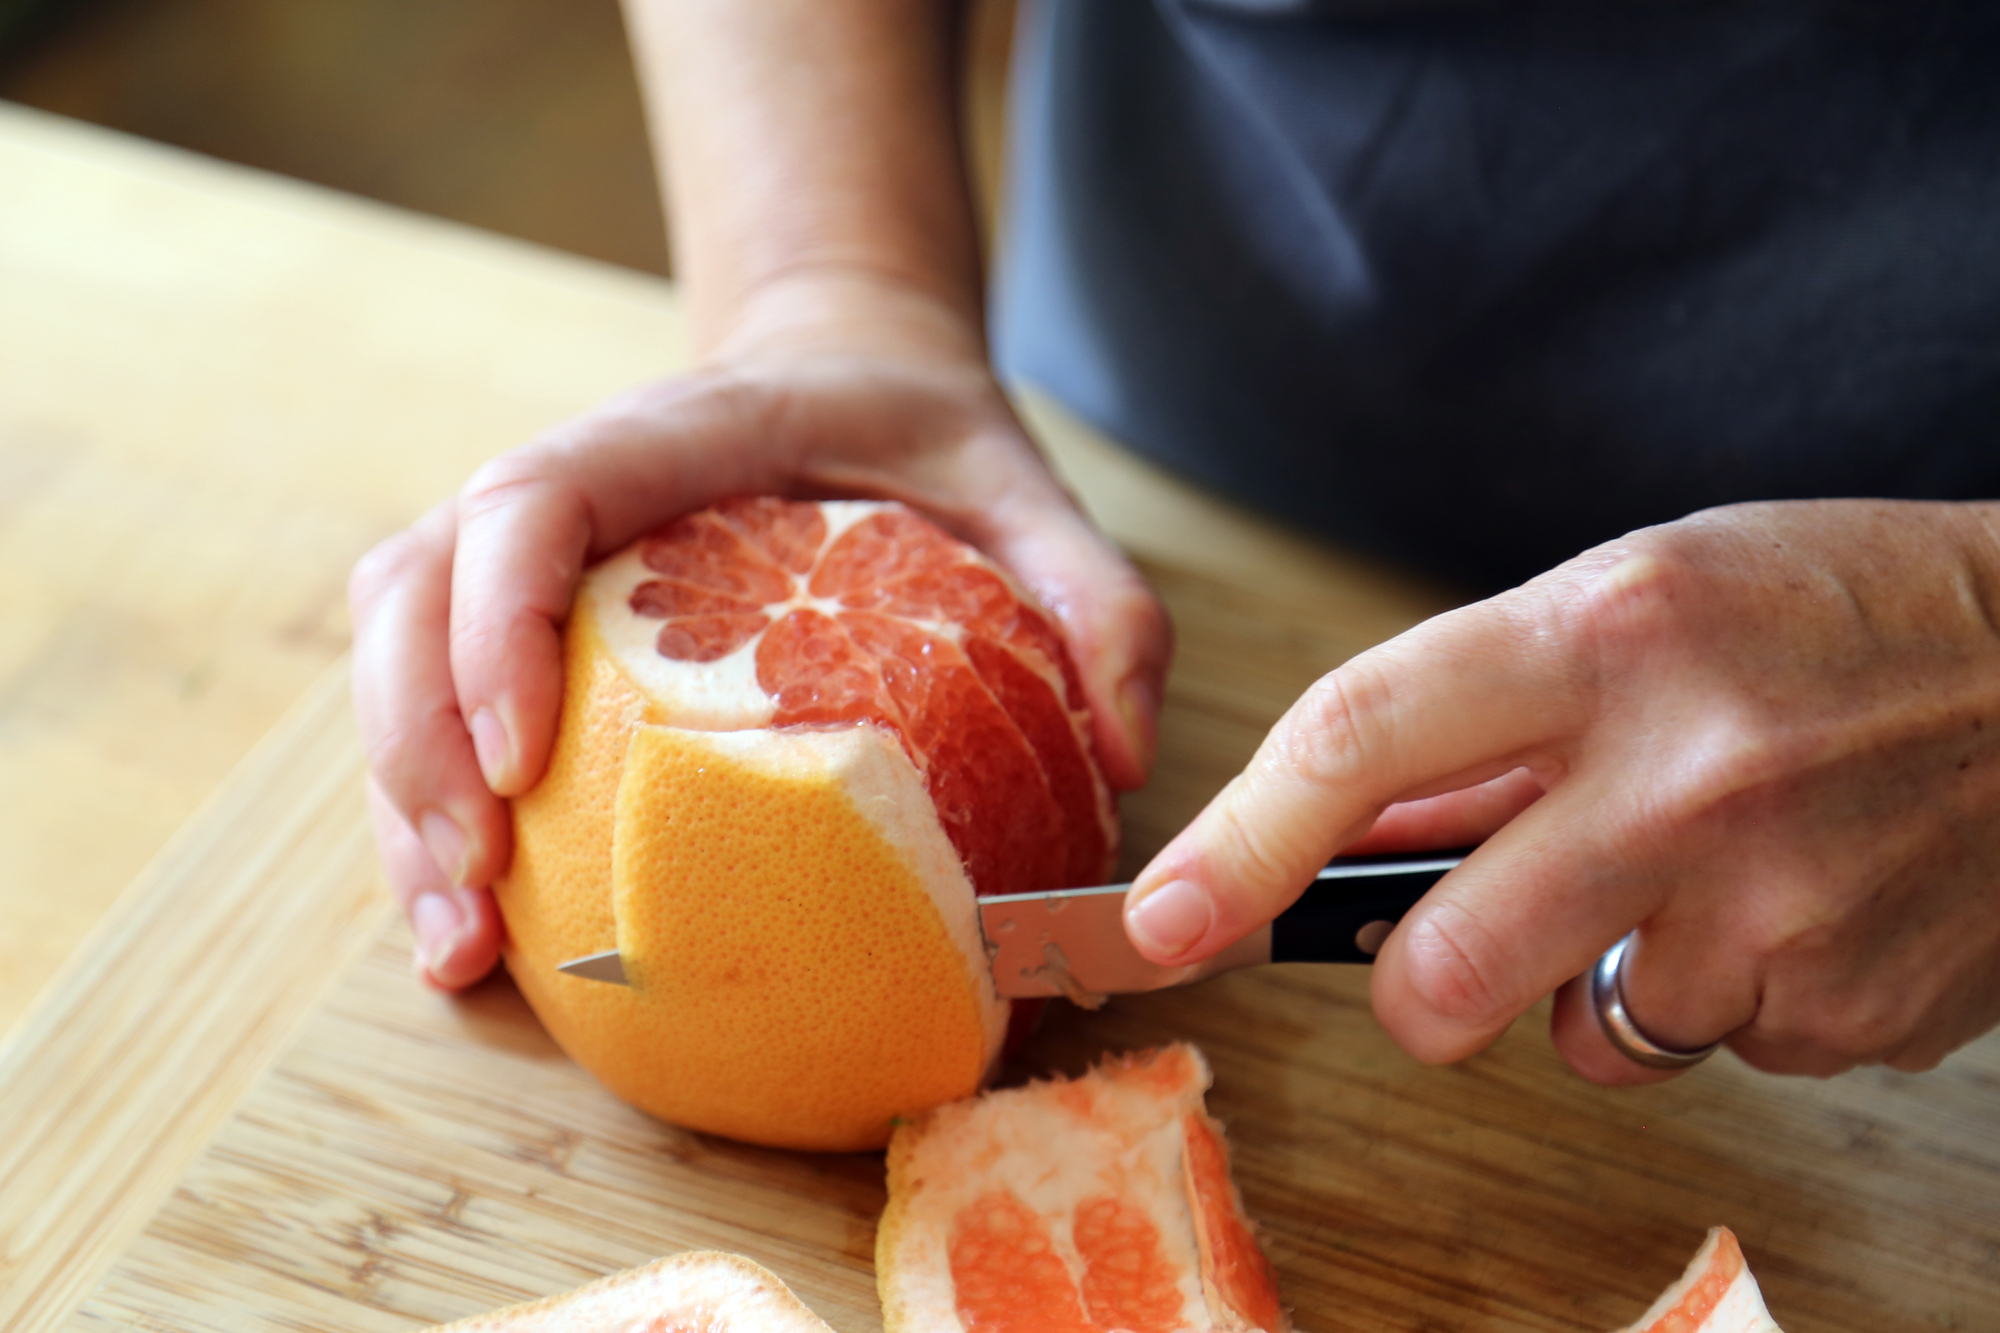 To segment the grapefruit, trim the top and bottom off of the grapefruit, then using a thin knife, cut away the peel and pith in sections, moving along the contour of the fruit.